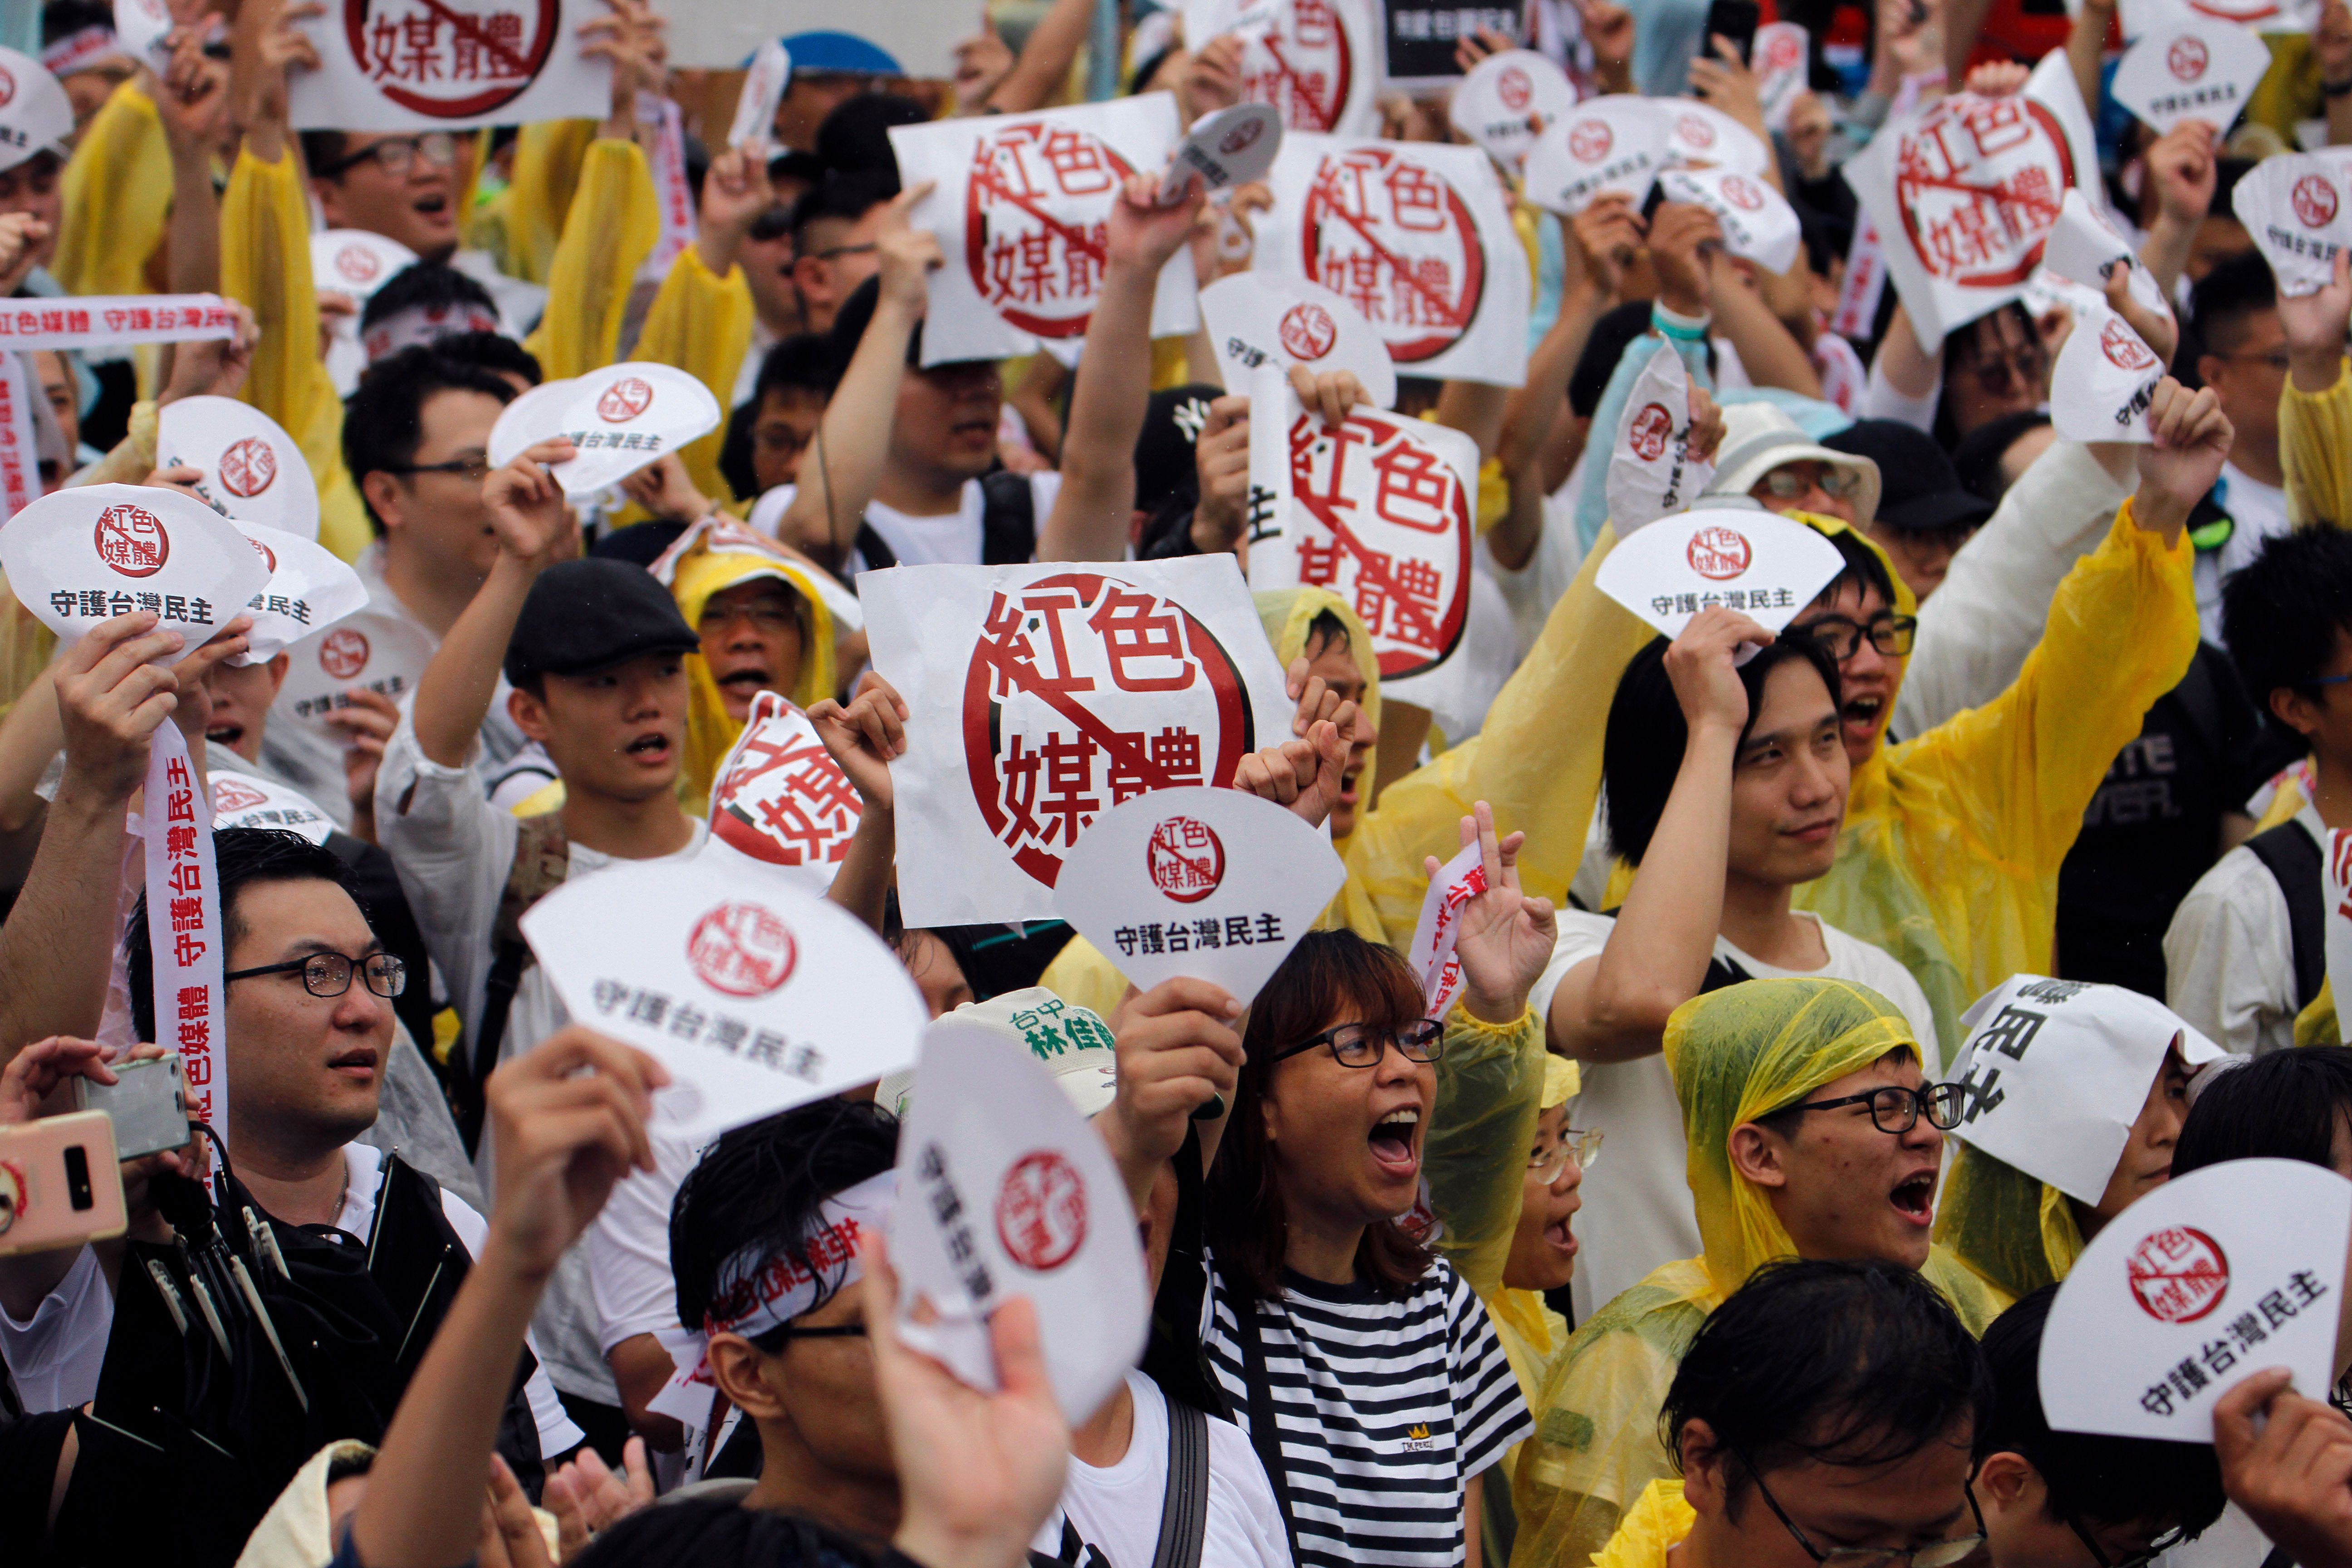 BGMI: Protesters in Taiwan hold placards with messages that read “reject red media” and “safeguard the nation’s democracy” during a rally against pro-China media.